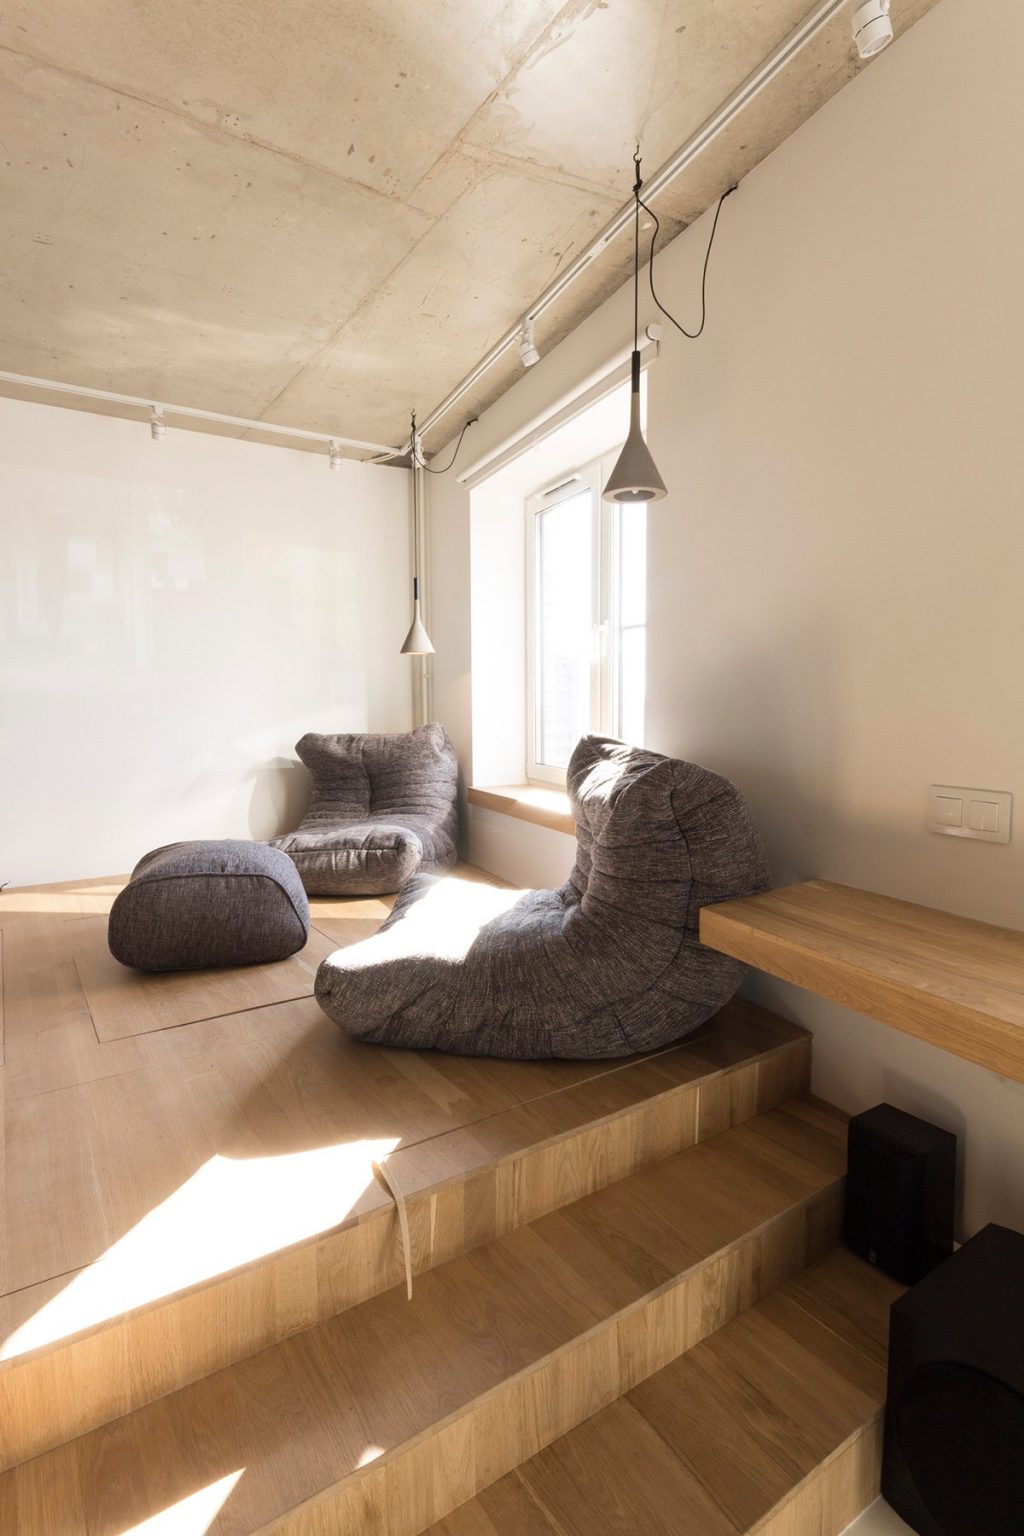 6.Upper-level-relaxation-space-wooden-grey-hanging-light-simple-square-window